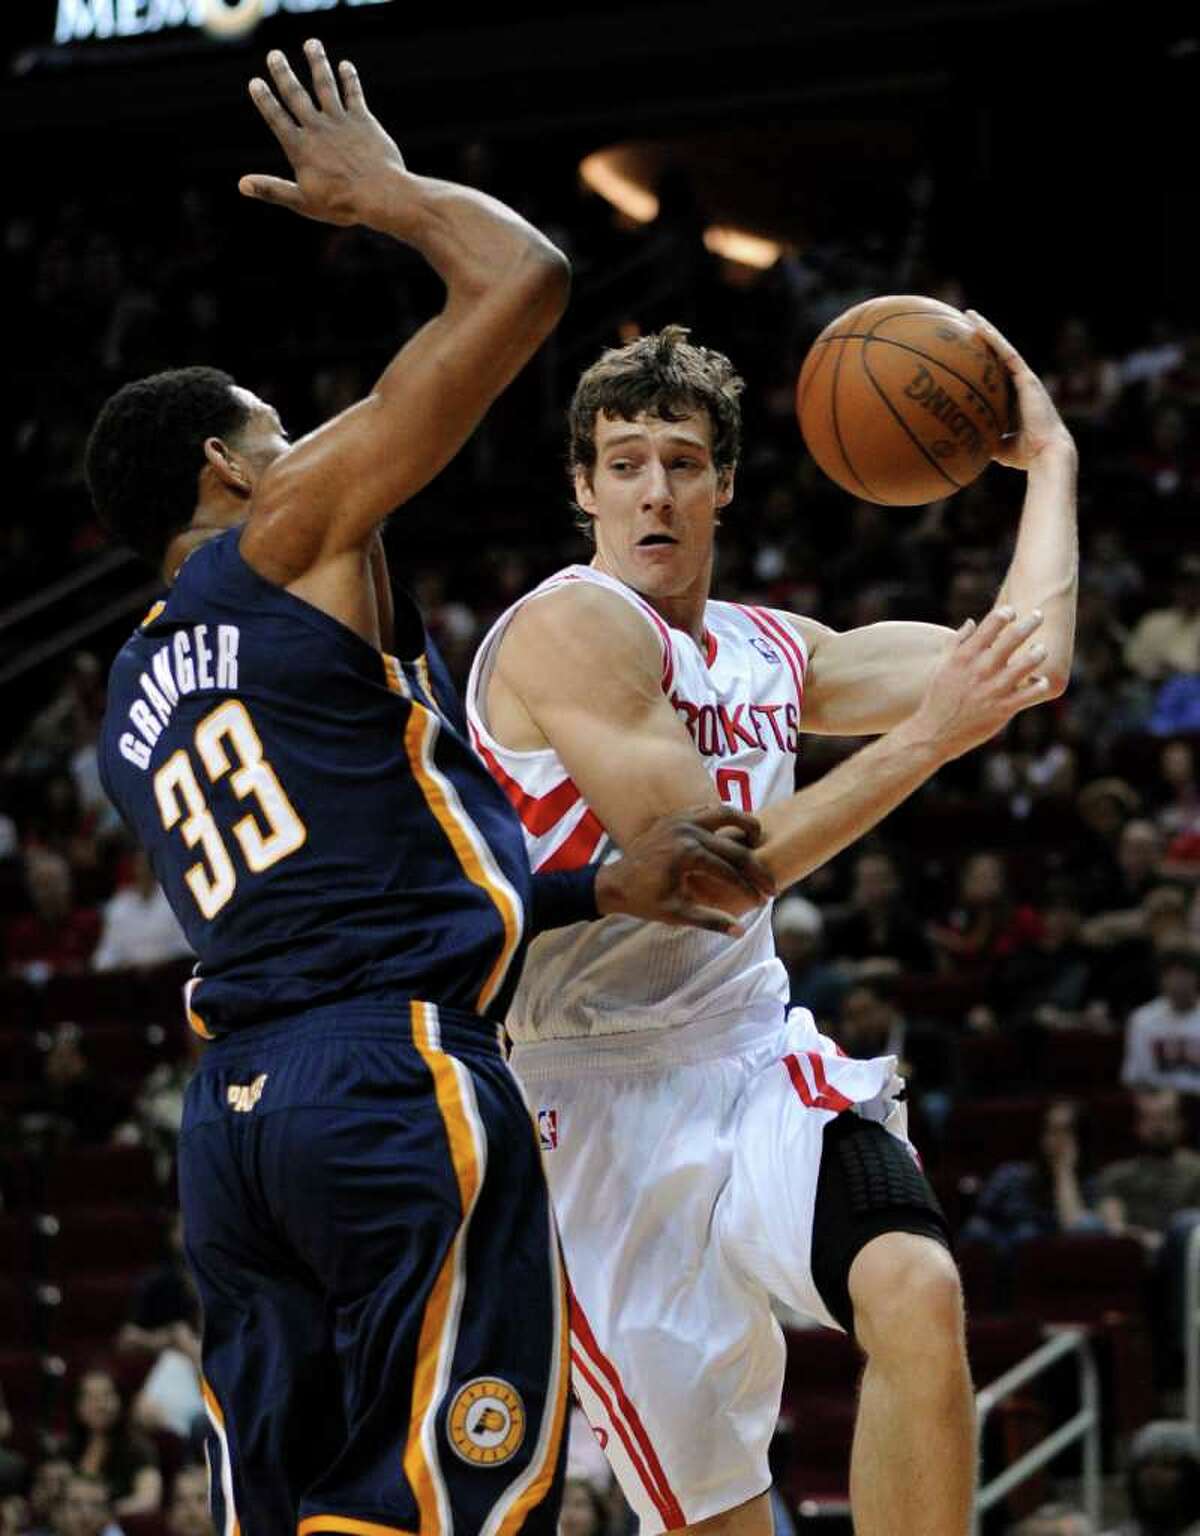 Houston Rockets' Goran Dragic (3) looks to pass the ball around Indiana Pacers' Danny Granger (33) in the first half of an NBA basketball game Sunday, April 1, 2012, in Houston. (AP Photo/Pat Sullivan)